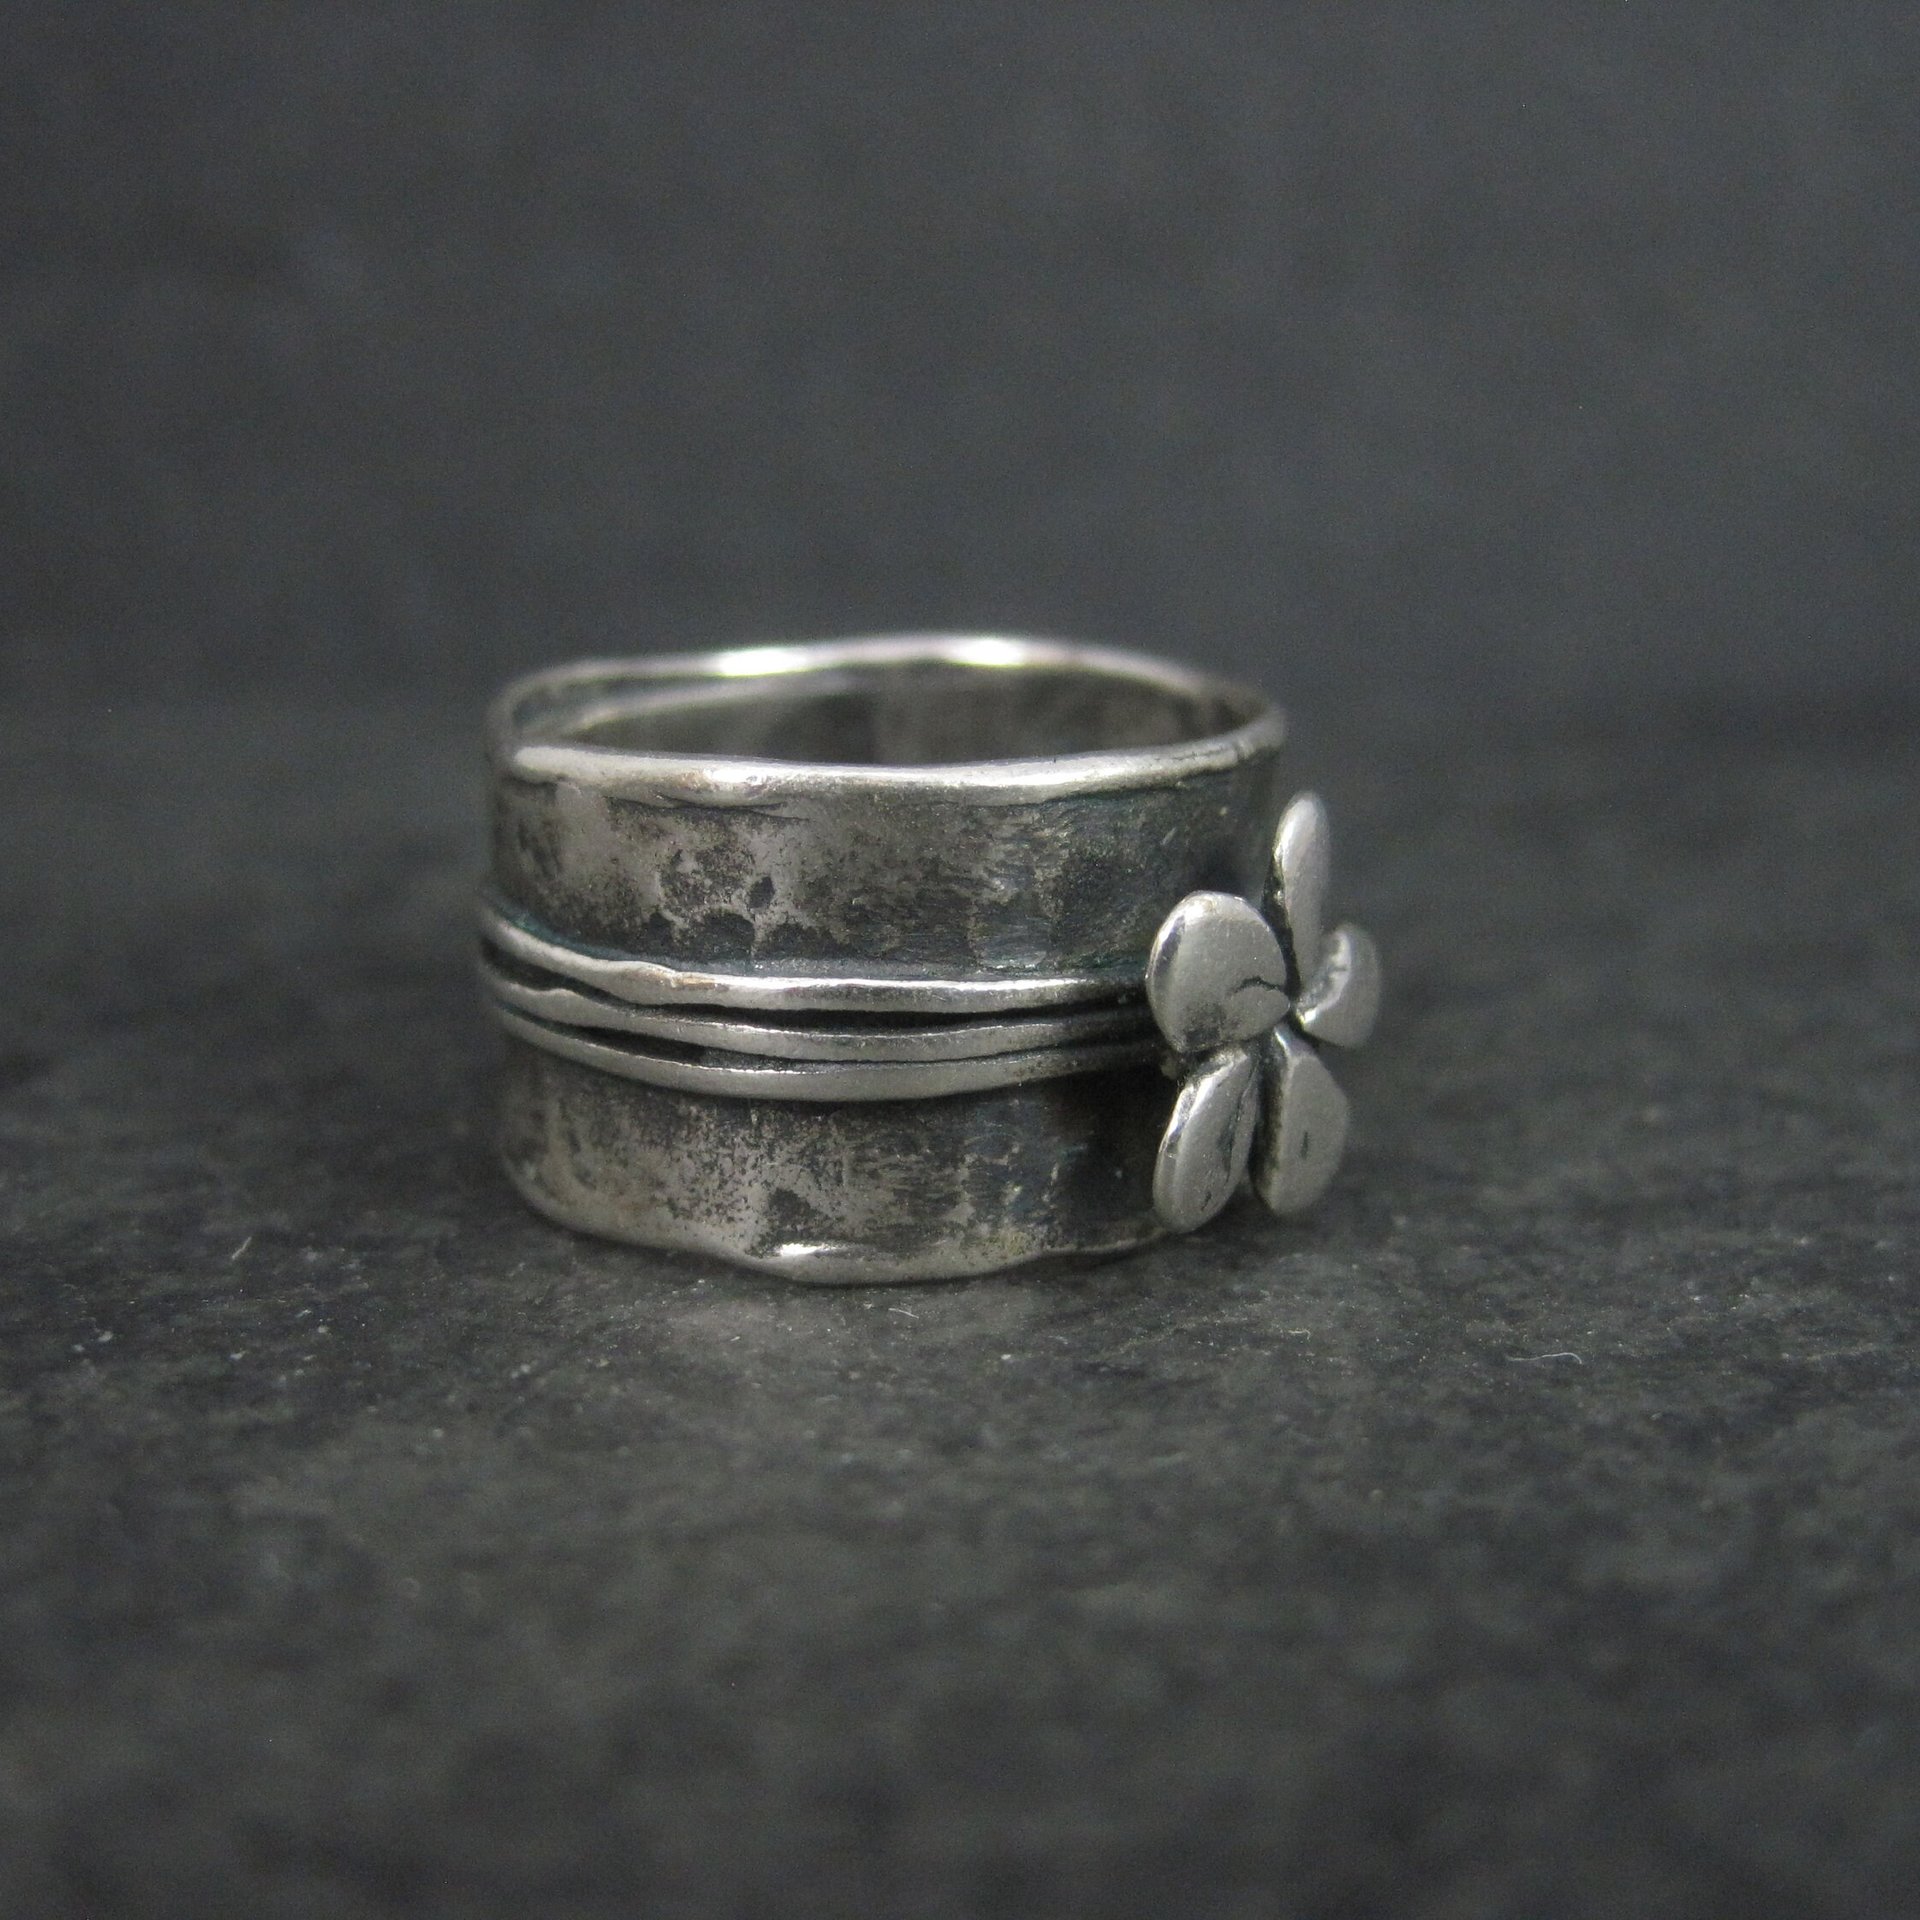 Wide Sterling Flower Band Ring Size 7